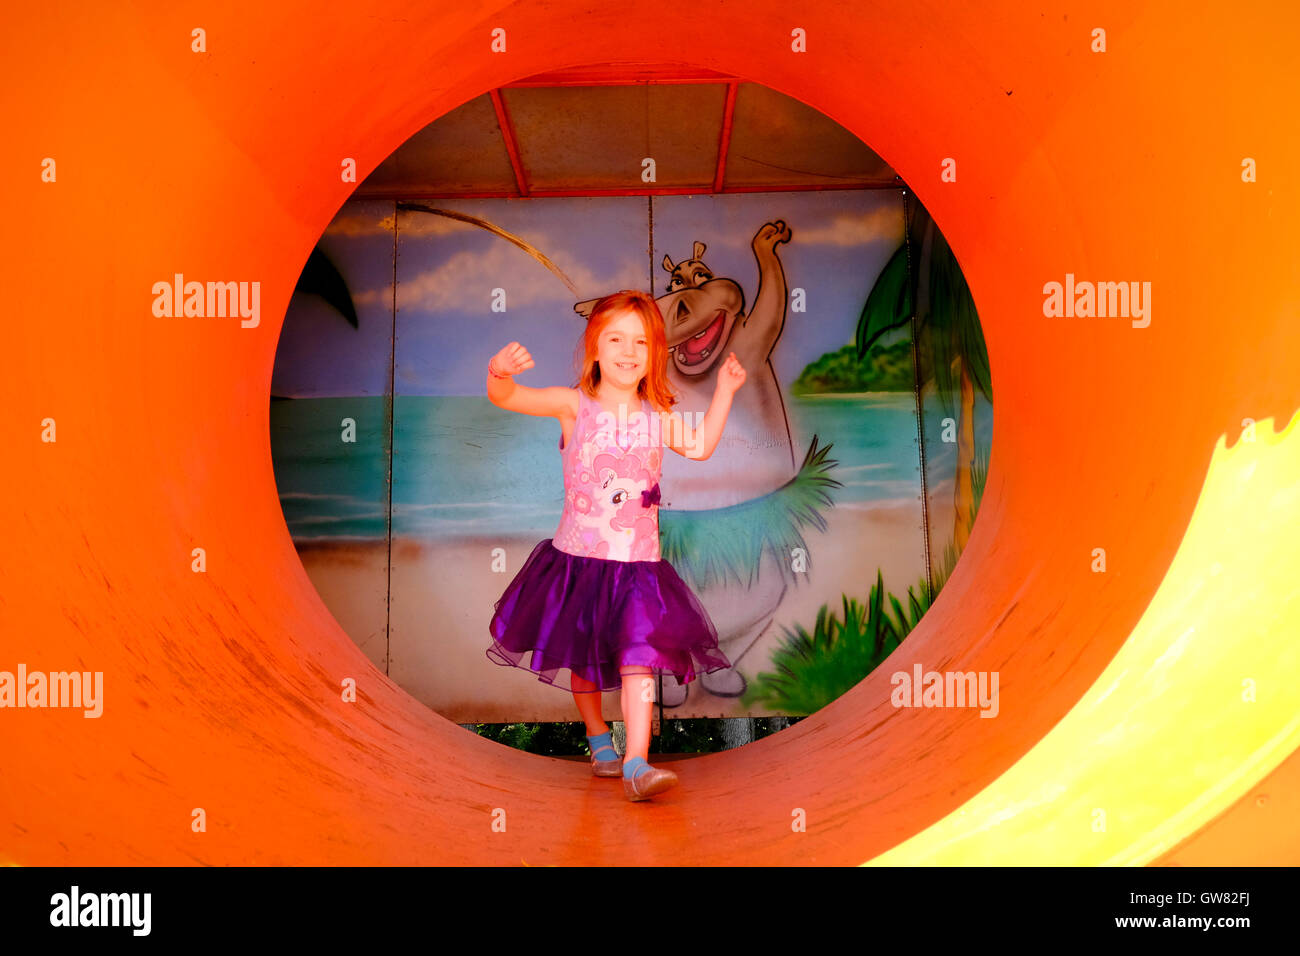 Young girl at play in the final room of a fun house with a moving tubular exit Stock Photo